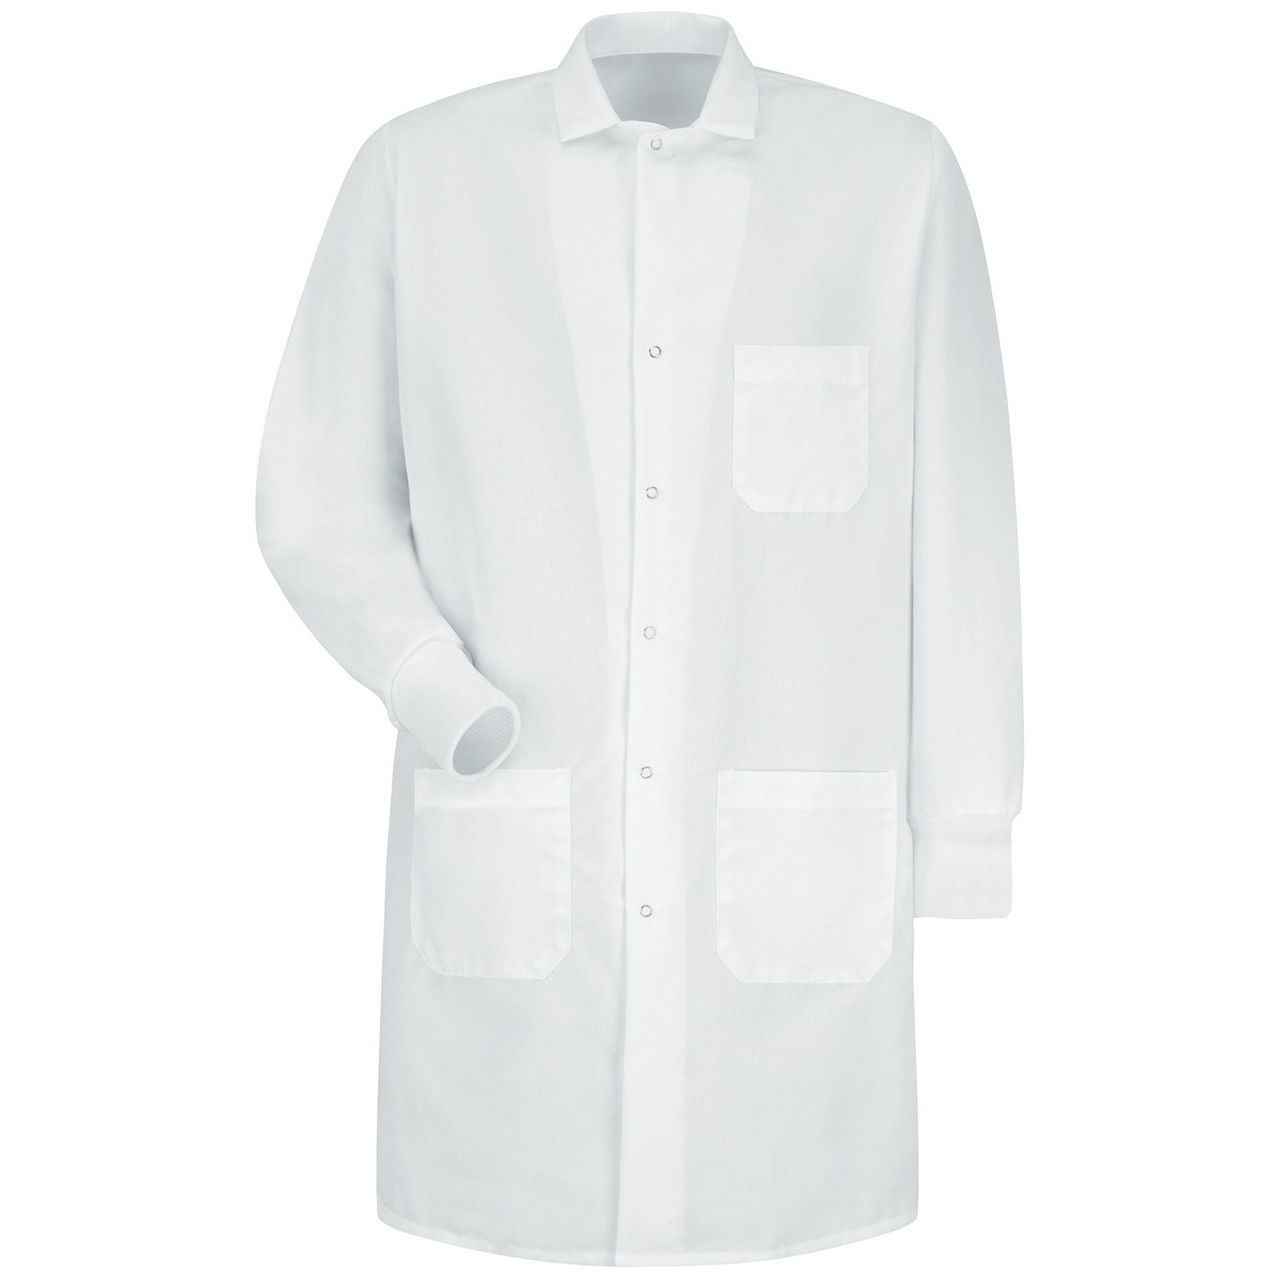 Are your lab coats made in the USA. If some I need a quote before friday seeking to bid on a contract from the gove